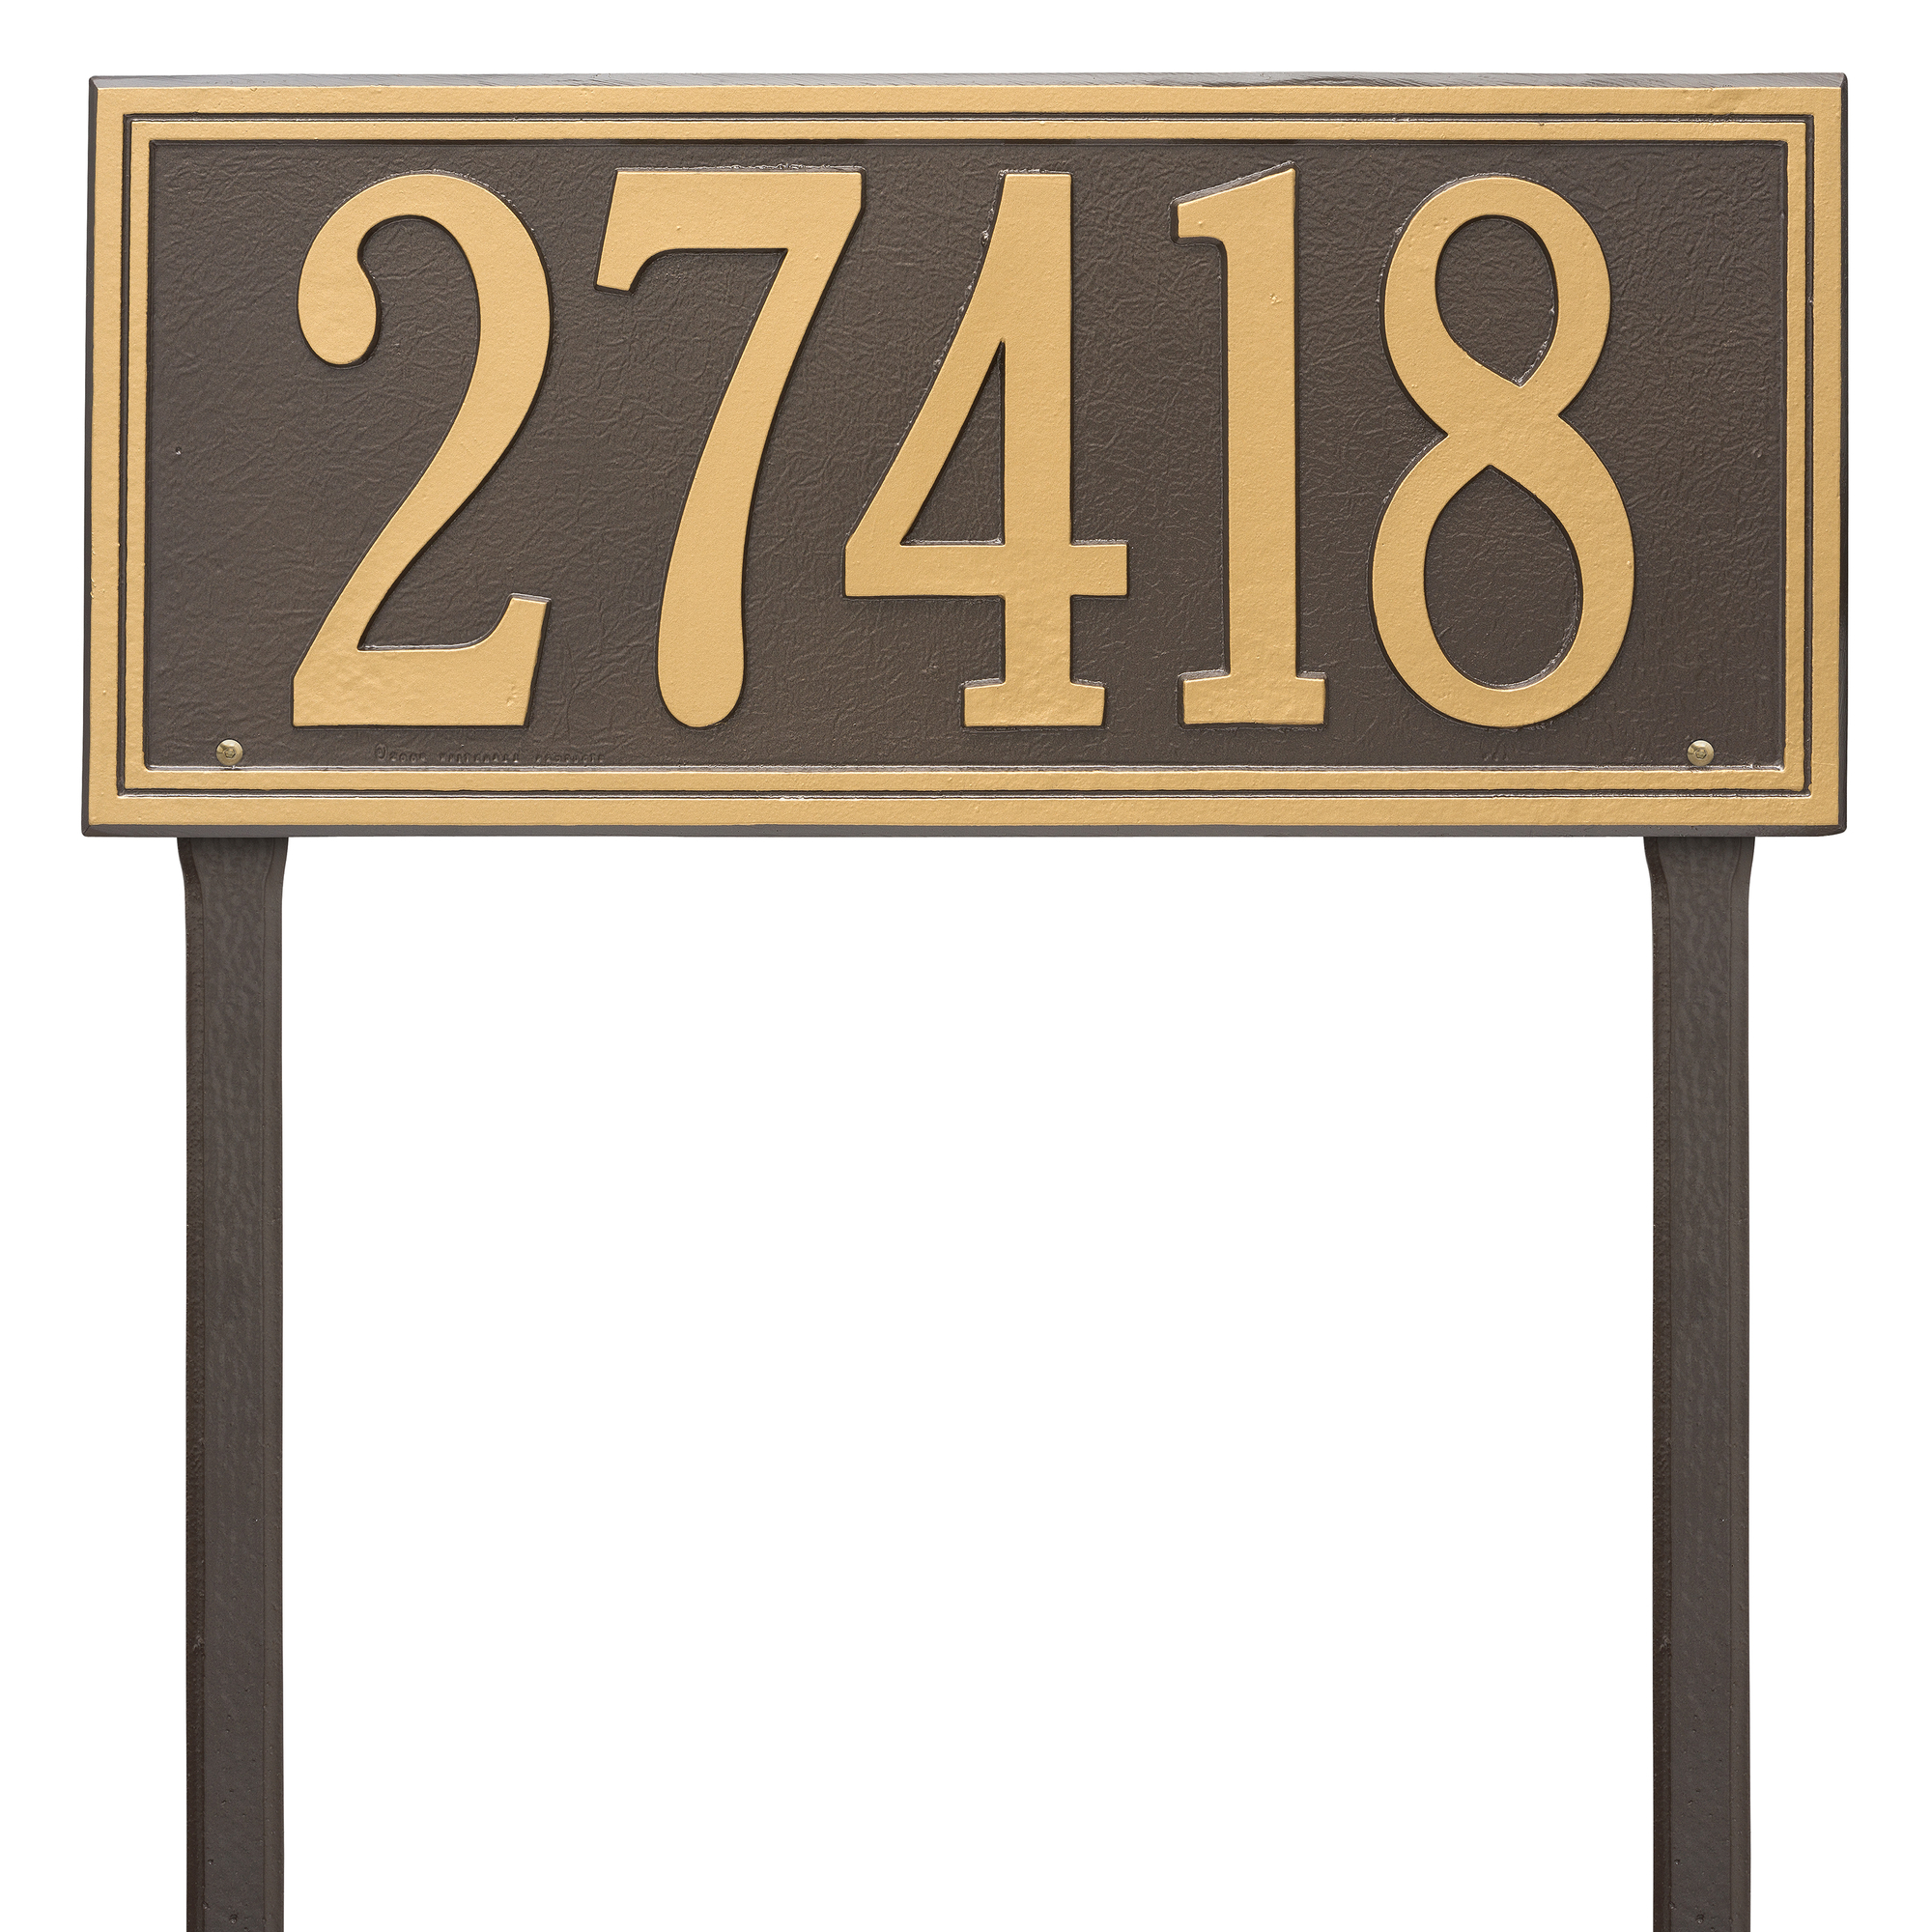 Personalized Whitehall Products Single Line Estate Lawn Plaque in Oil Rubbed Bronze - image 1 of 1